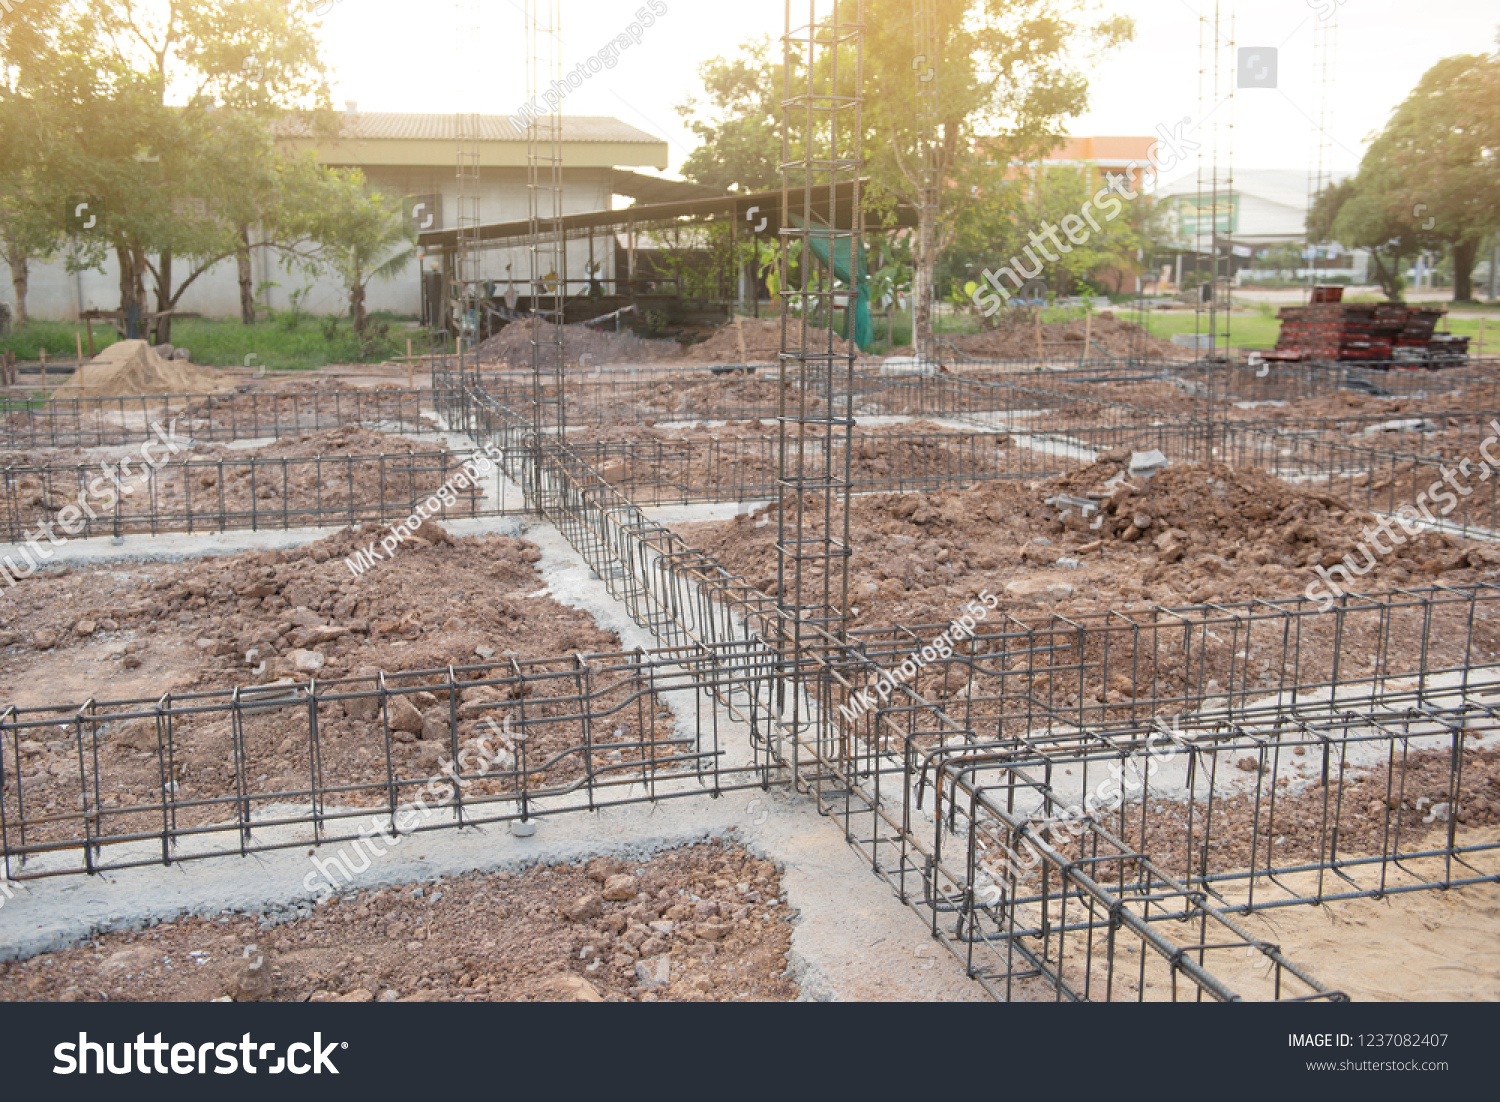 construction of reinforced concrete foundation beam for ground beam. #1237082407